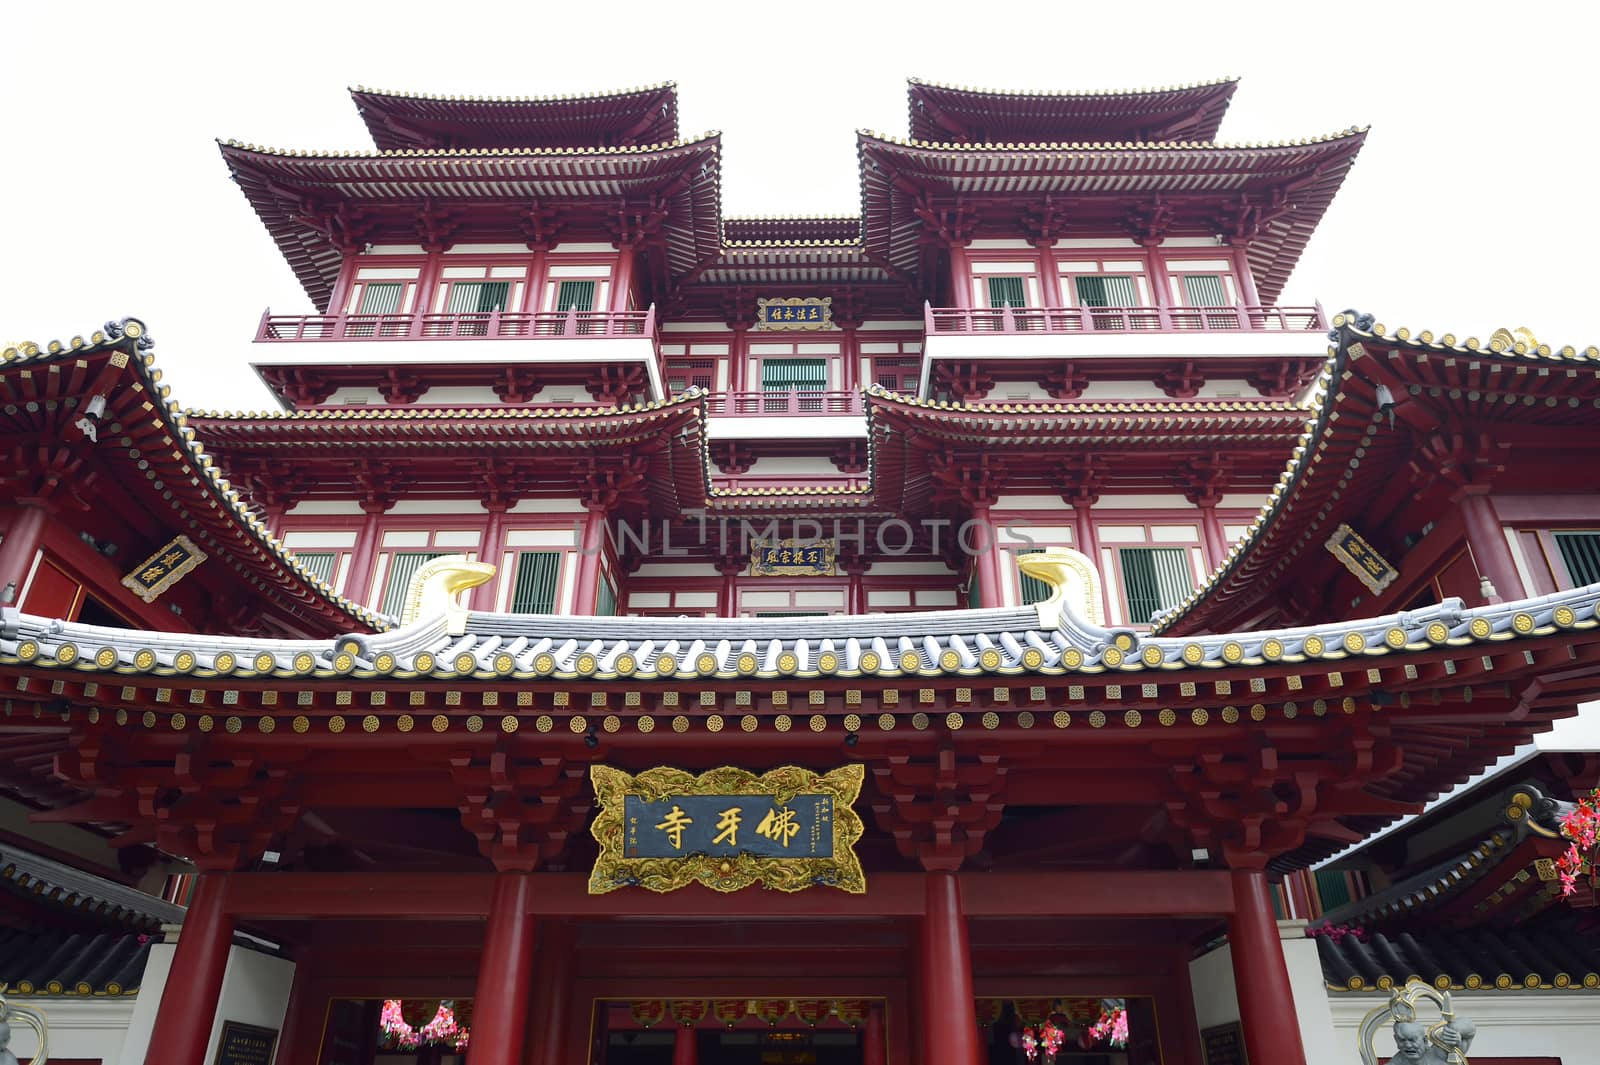 Buddha Tooth Relic Temple in China Town Singapore by think4photop